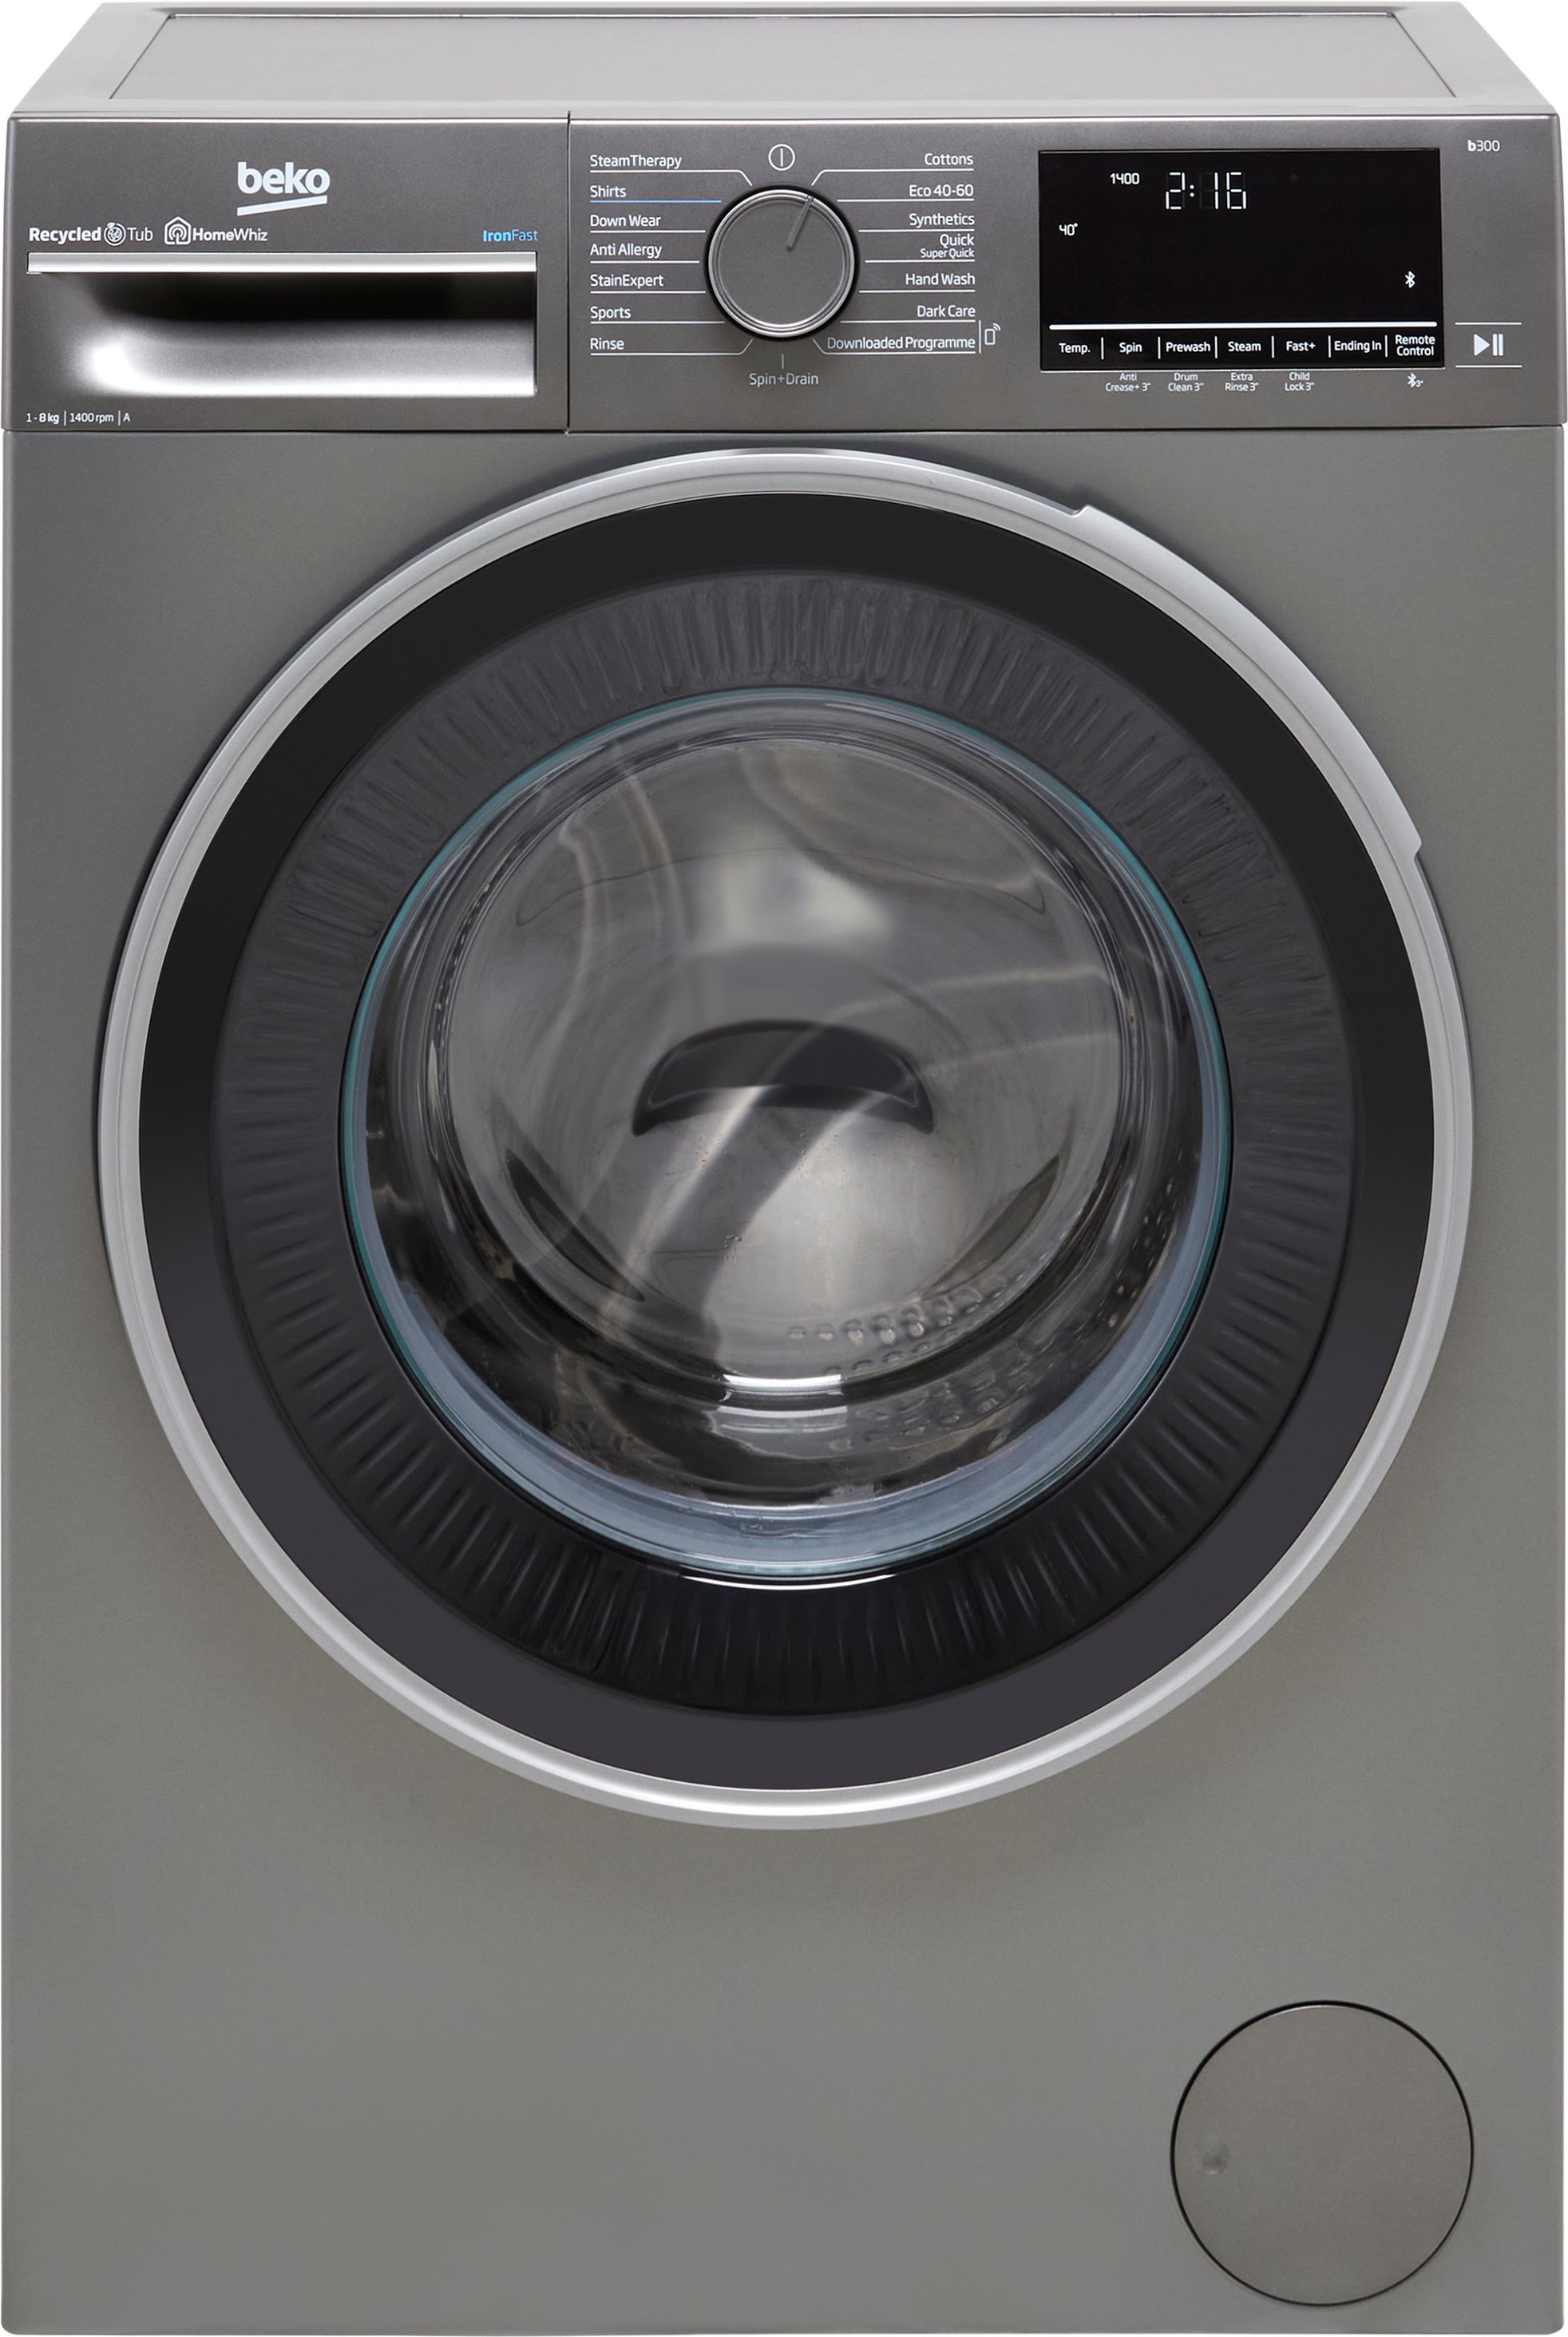 Beko B3W5841IG 8kg Washing Machine with 1400 rpm - Graphite - A Rated, Silver